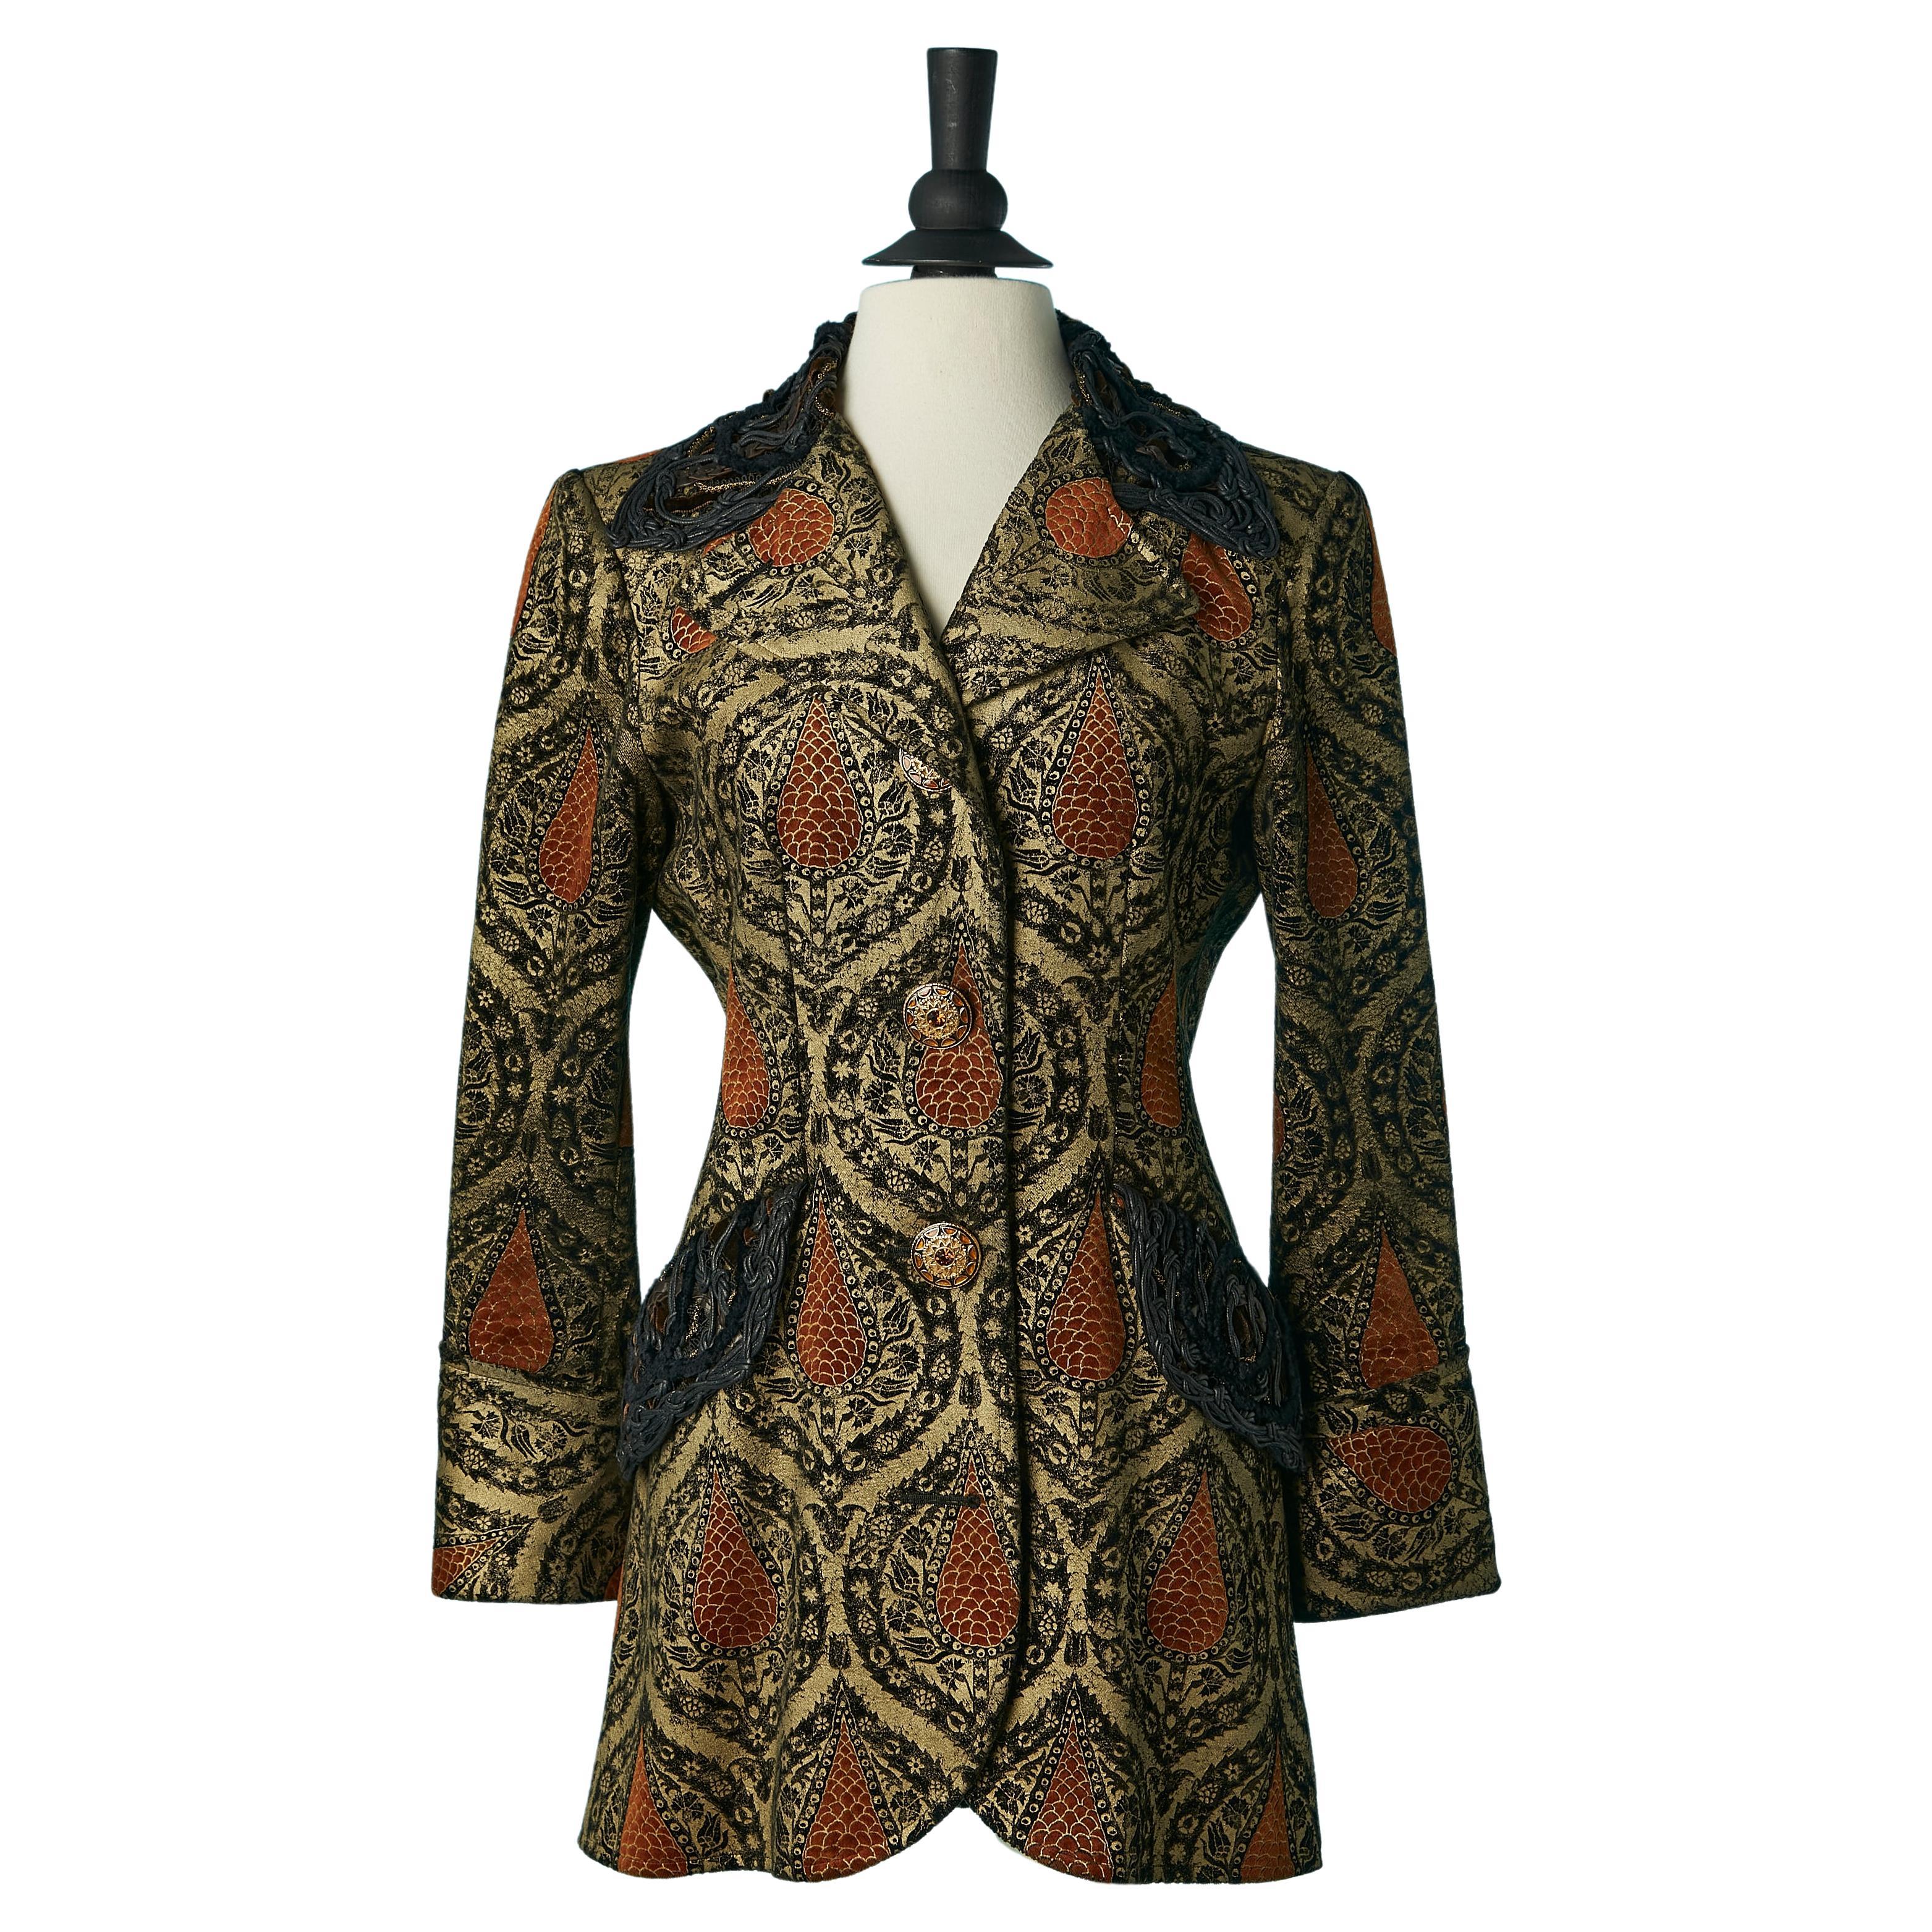 Damasked long evening jacket with jewelery buttons Christian Lacroix Paris  For Sale